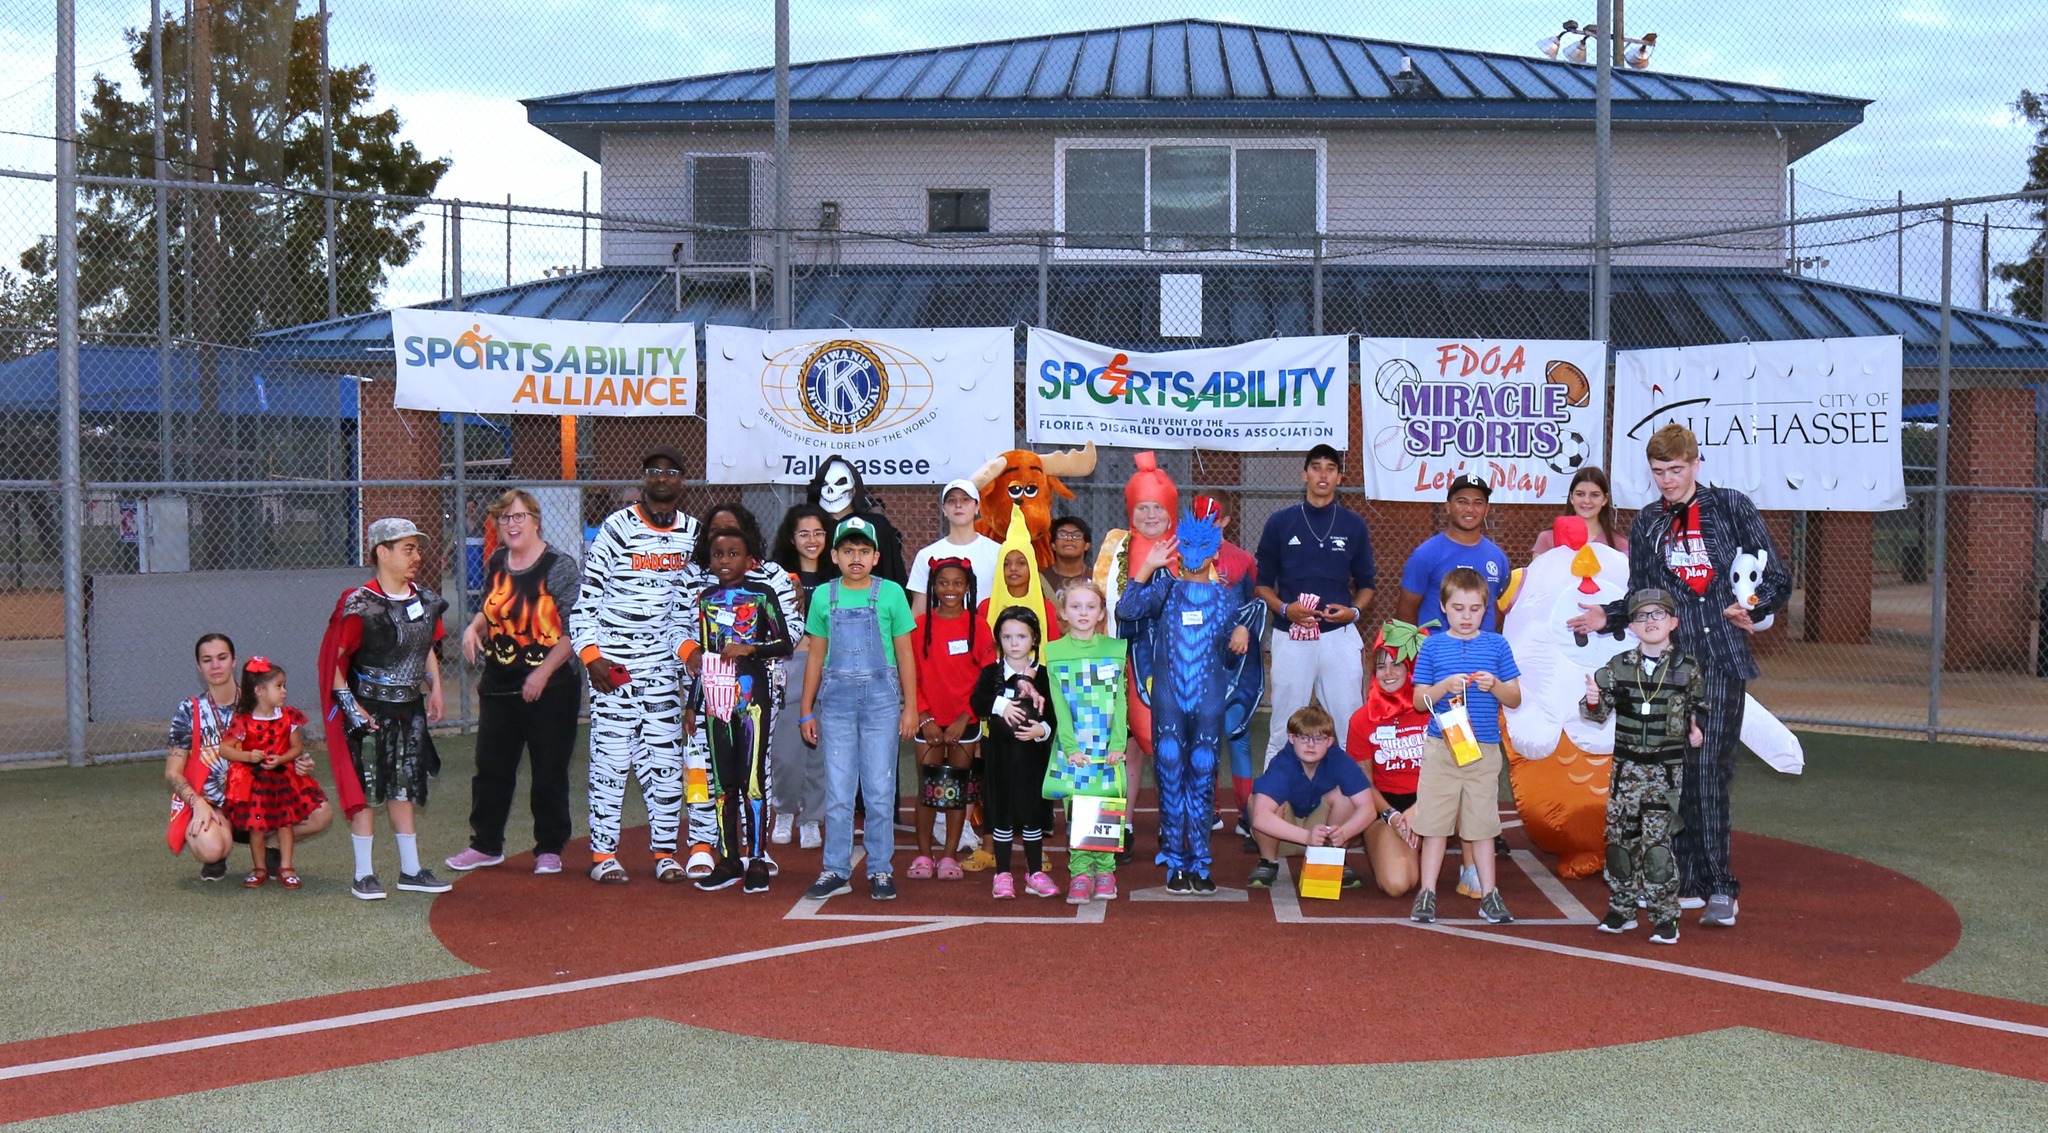 youth miracle sports participants dressed up for trick or treating